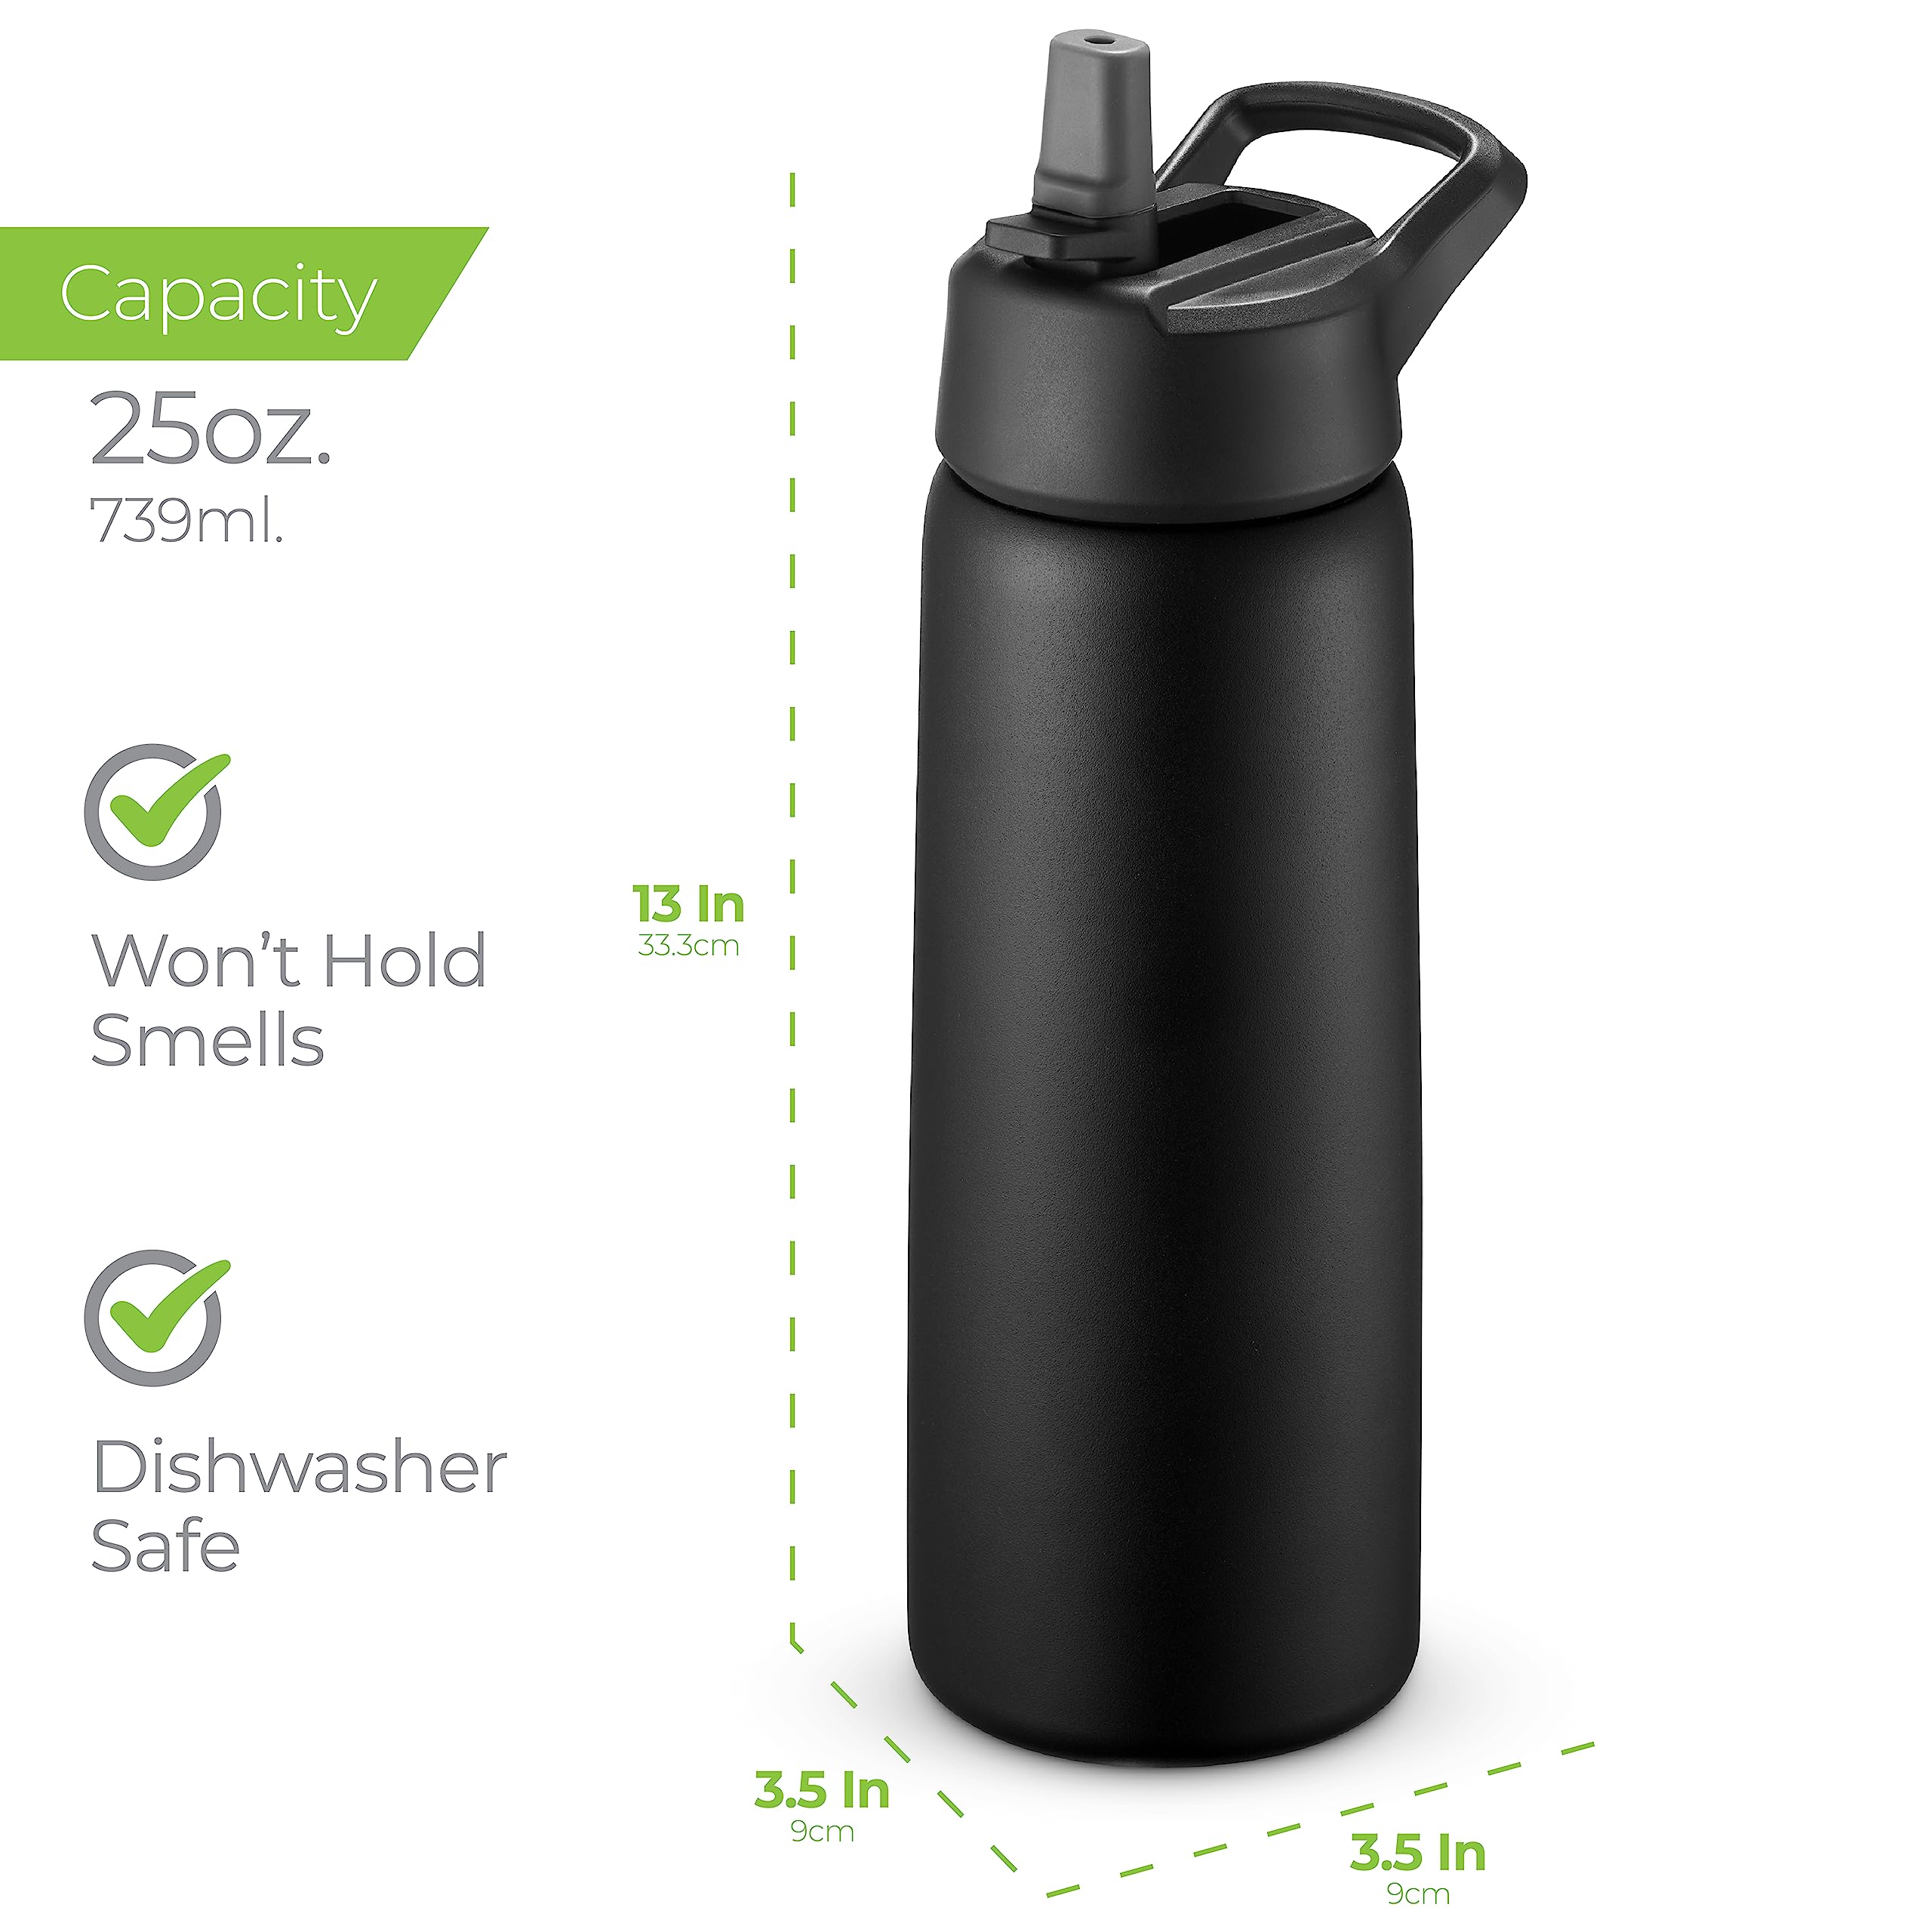 SipX™ Triple-Insulated Stainless Steel Water Bottle 25oz. With 3 Lids, BPA-Free Reusable Insulated Water Bottle Keeps Cold 24 Hours, Metal Water Bottle Made Of Sustainable Material For Hiking & Biking